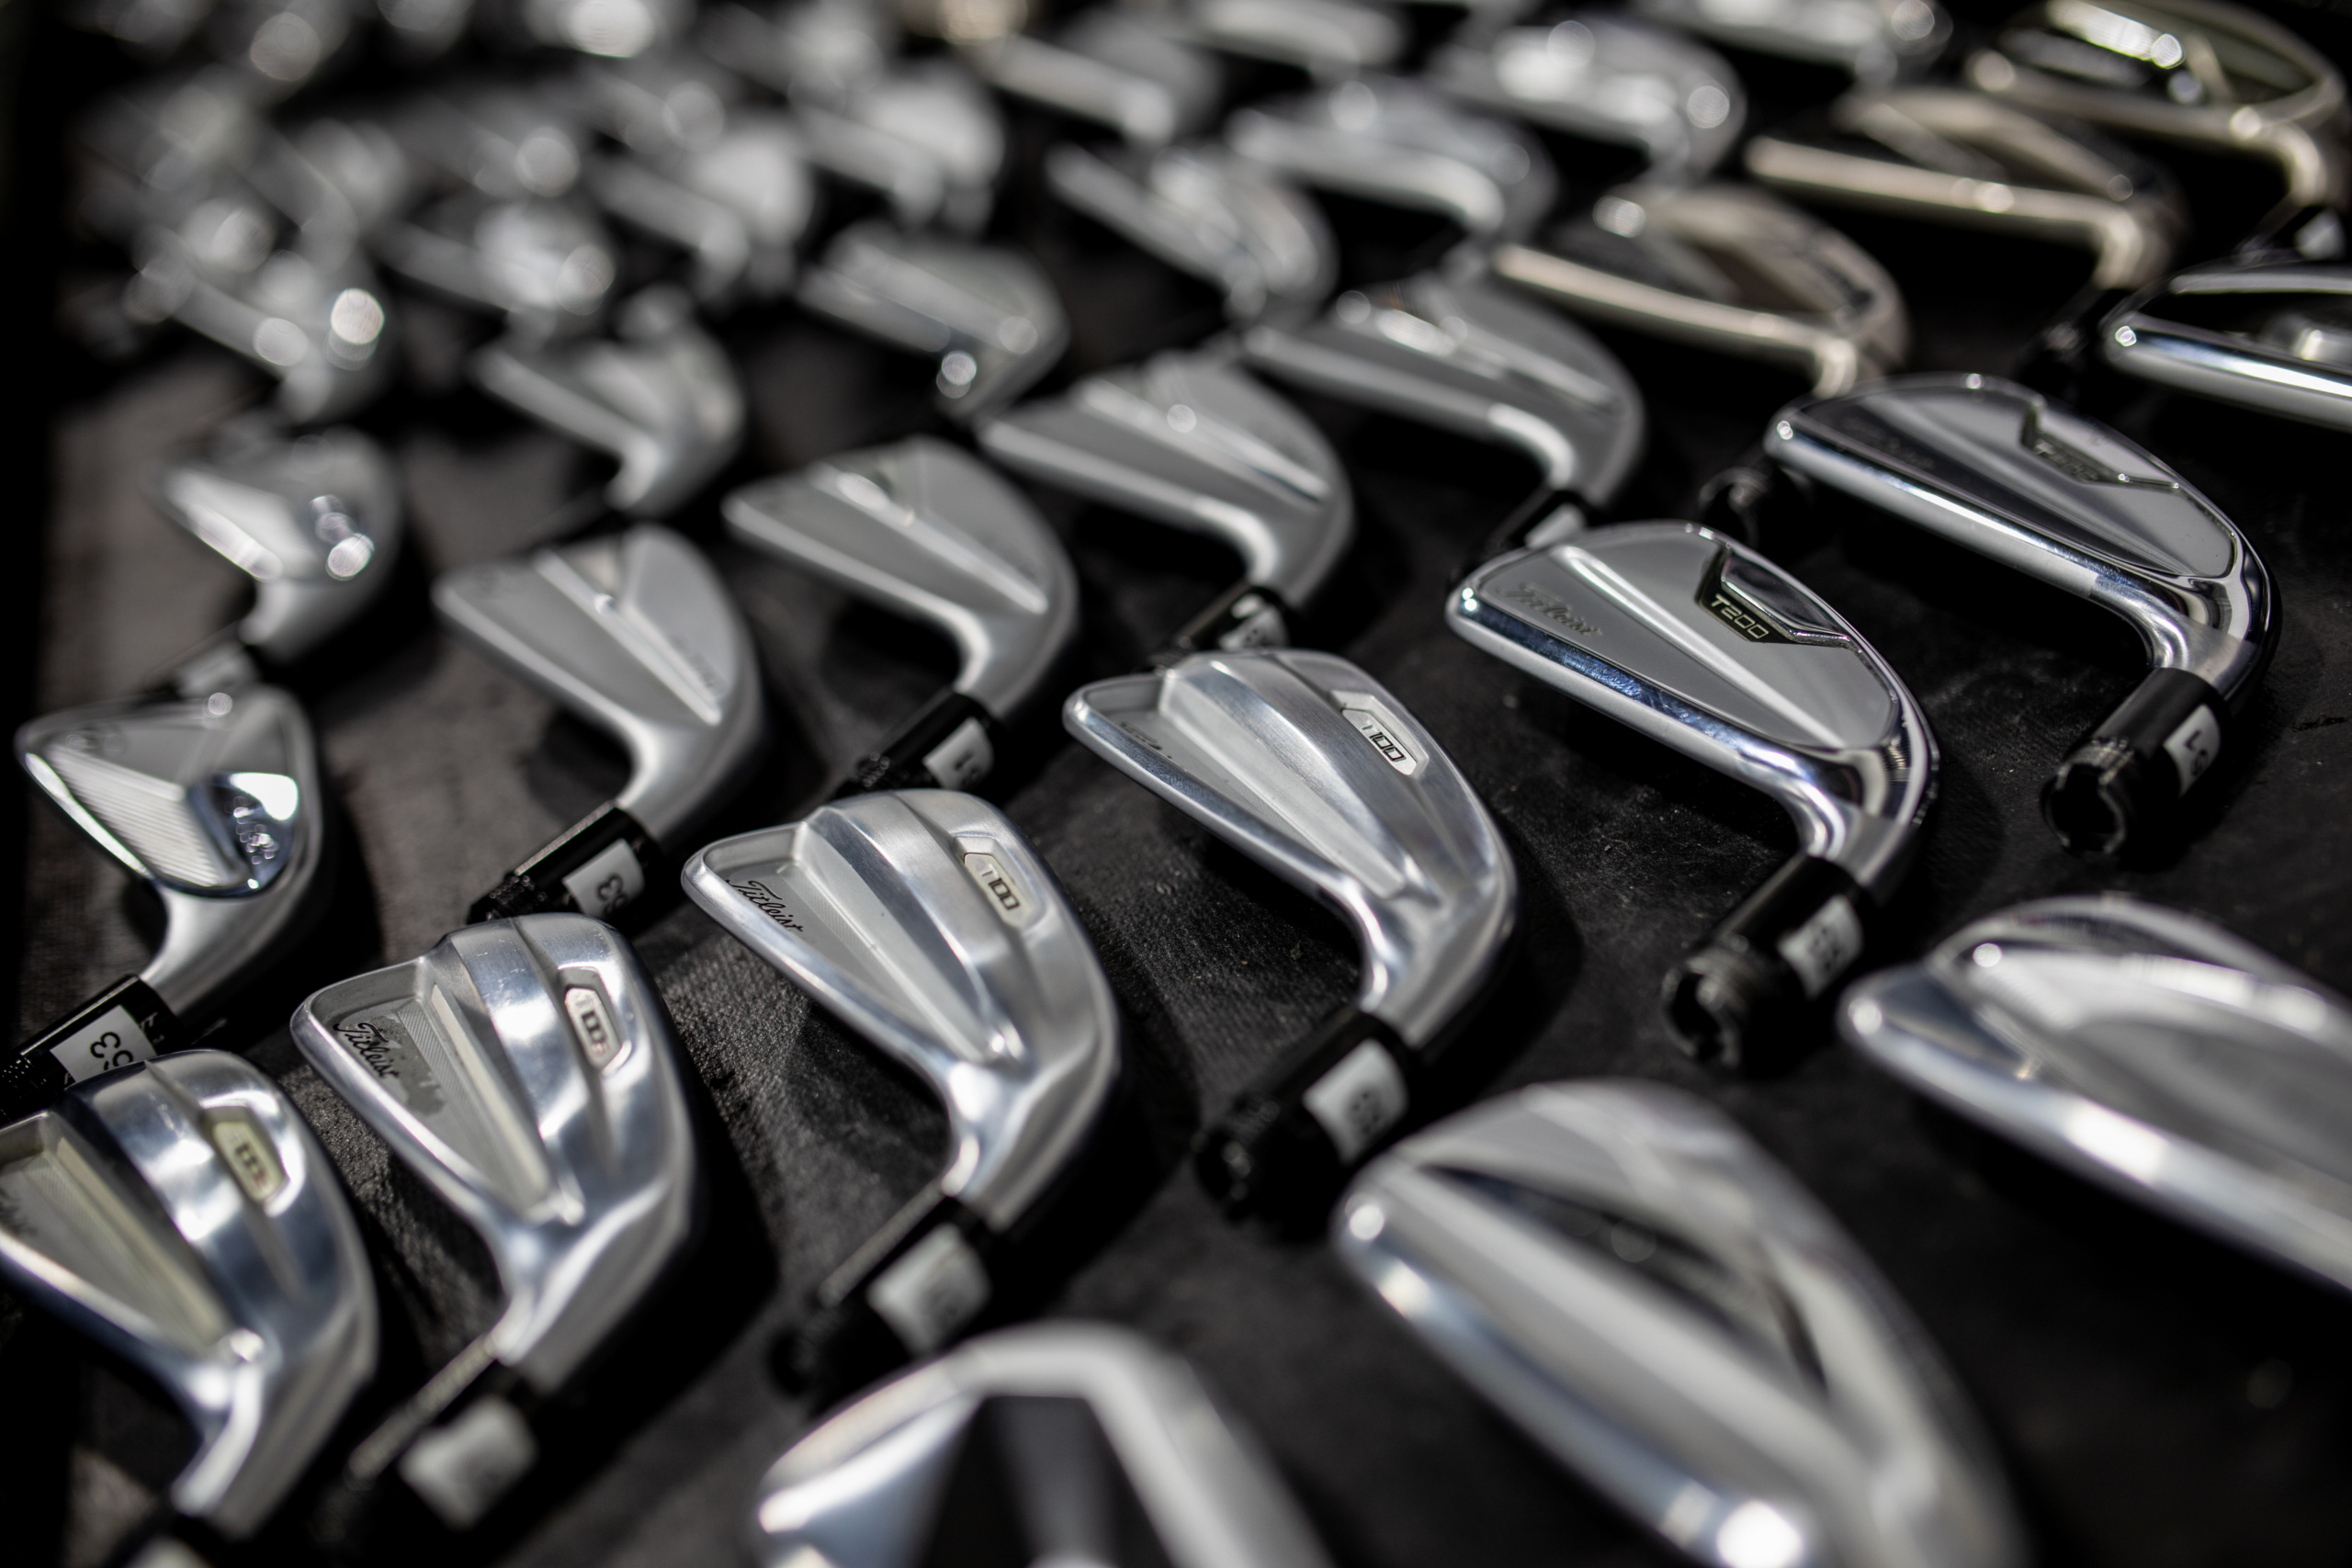 How Much Does Brand Matter During Club Fitting?